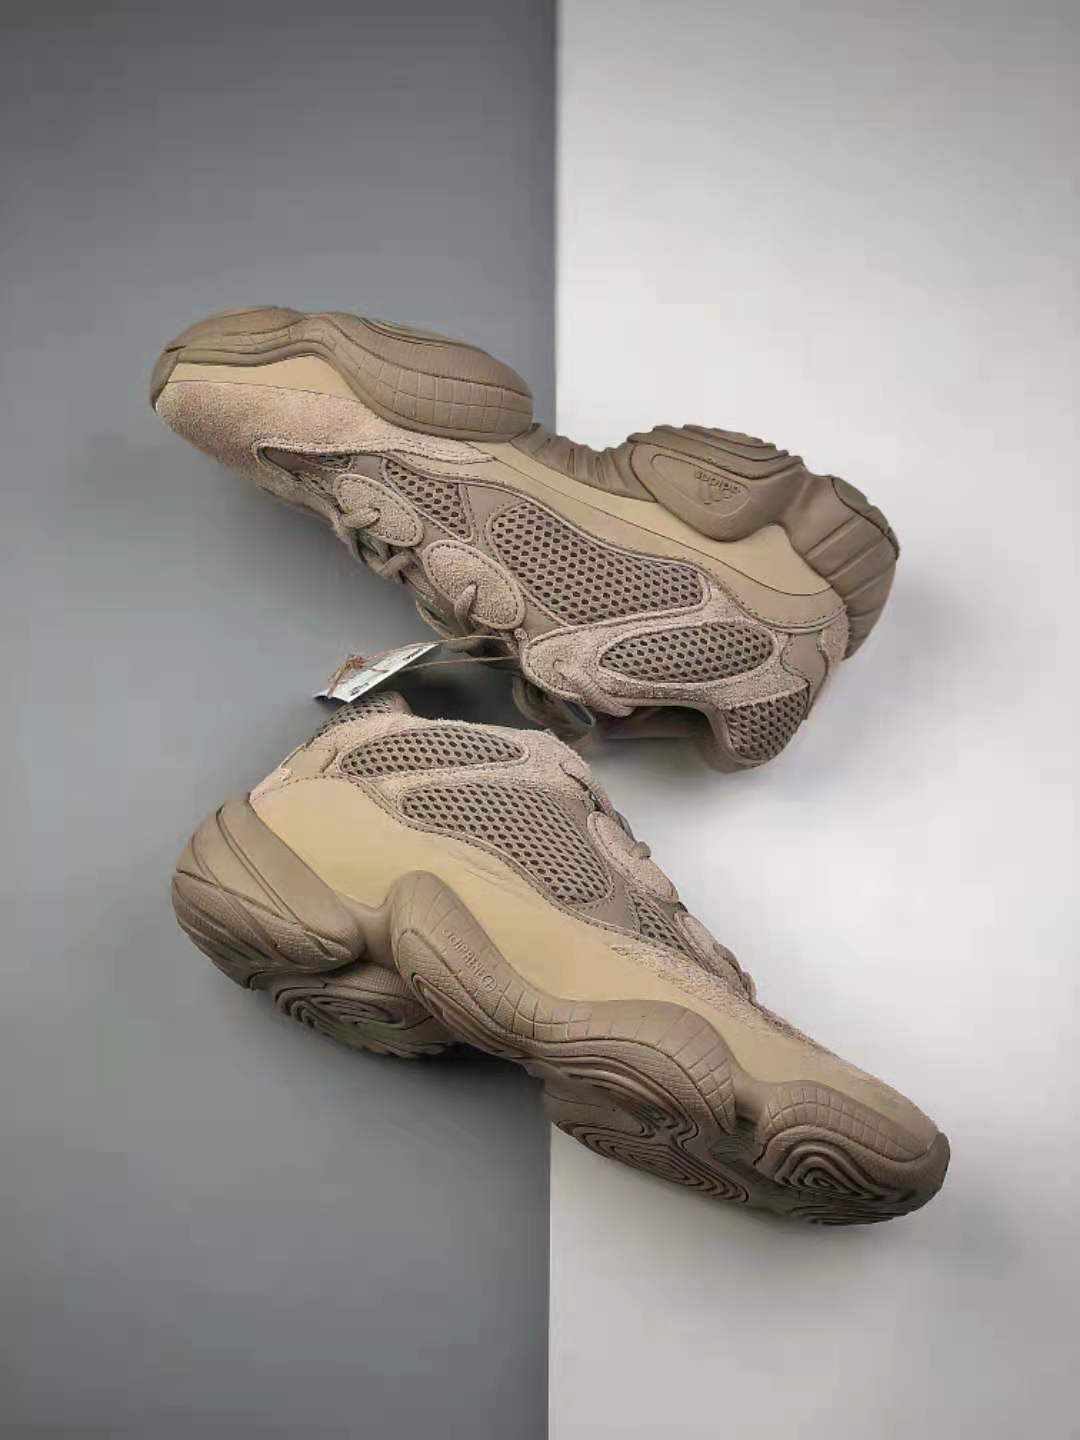 Adidas Yeezy 500 'Taupe Light' GX3605 - Popular Sneakers at Affordable Prices